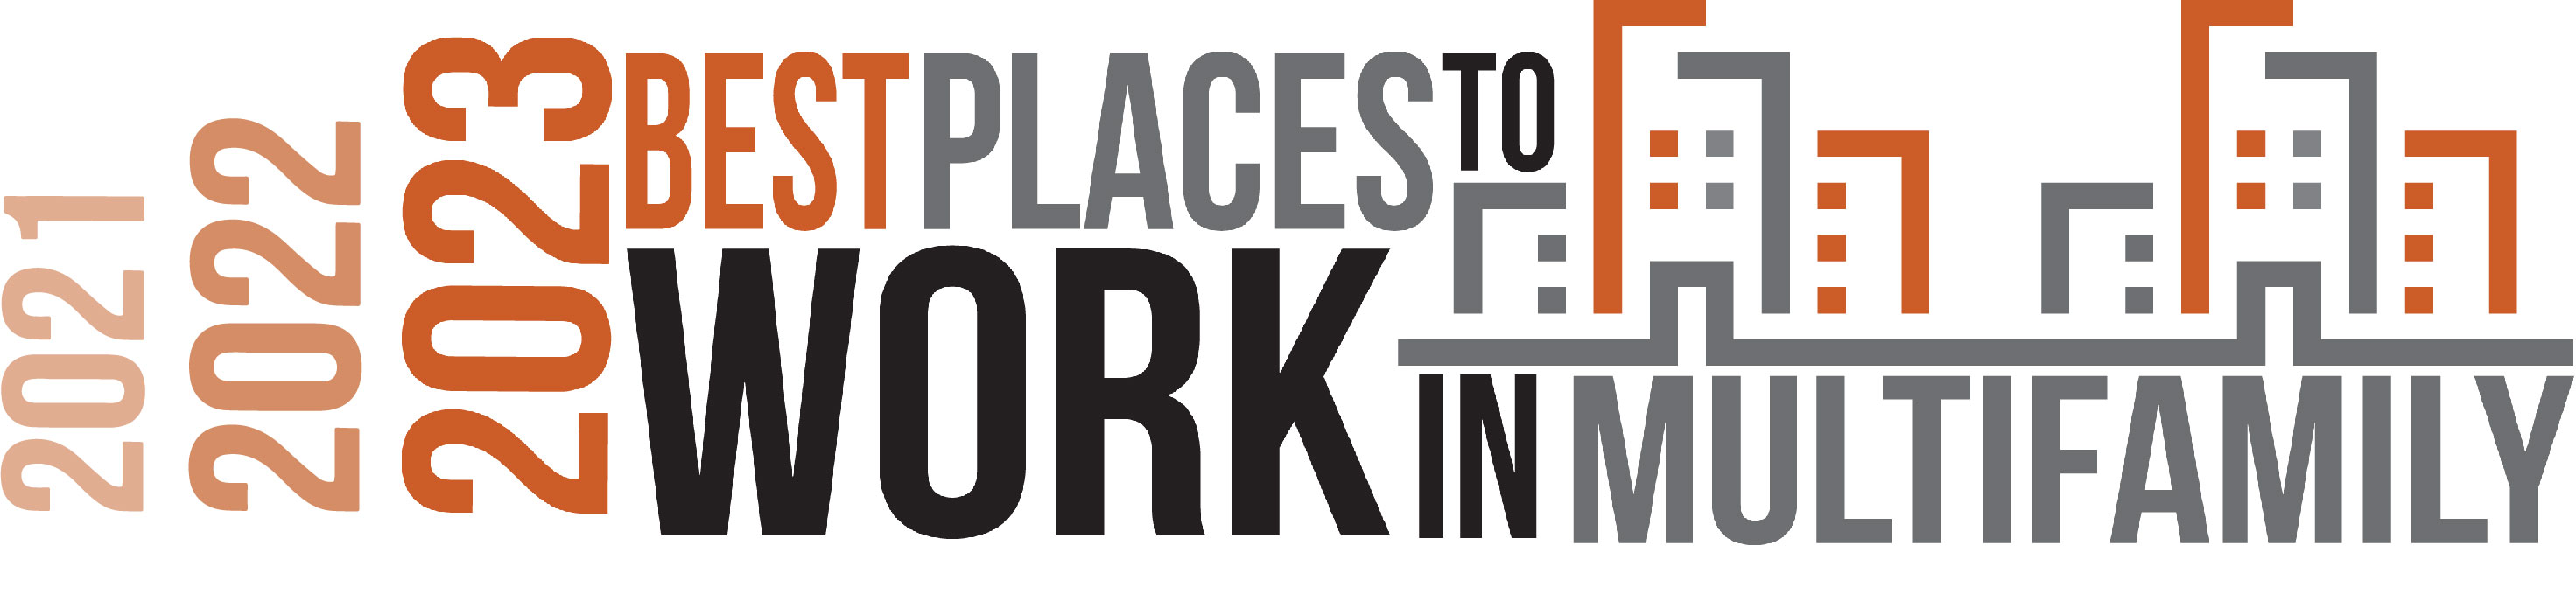 2021, 2022, 2023 Best Places to Work in Multifamily